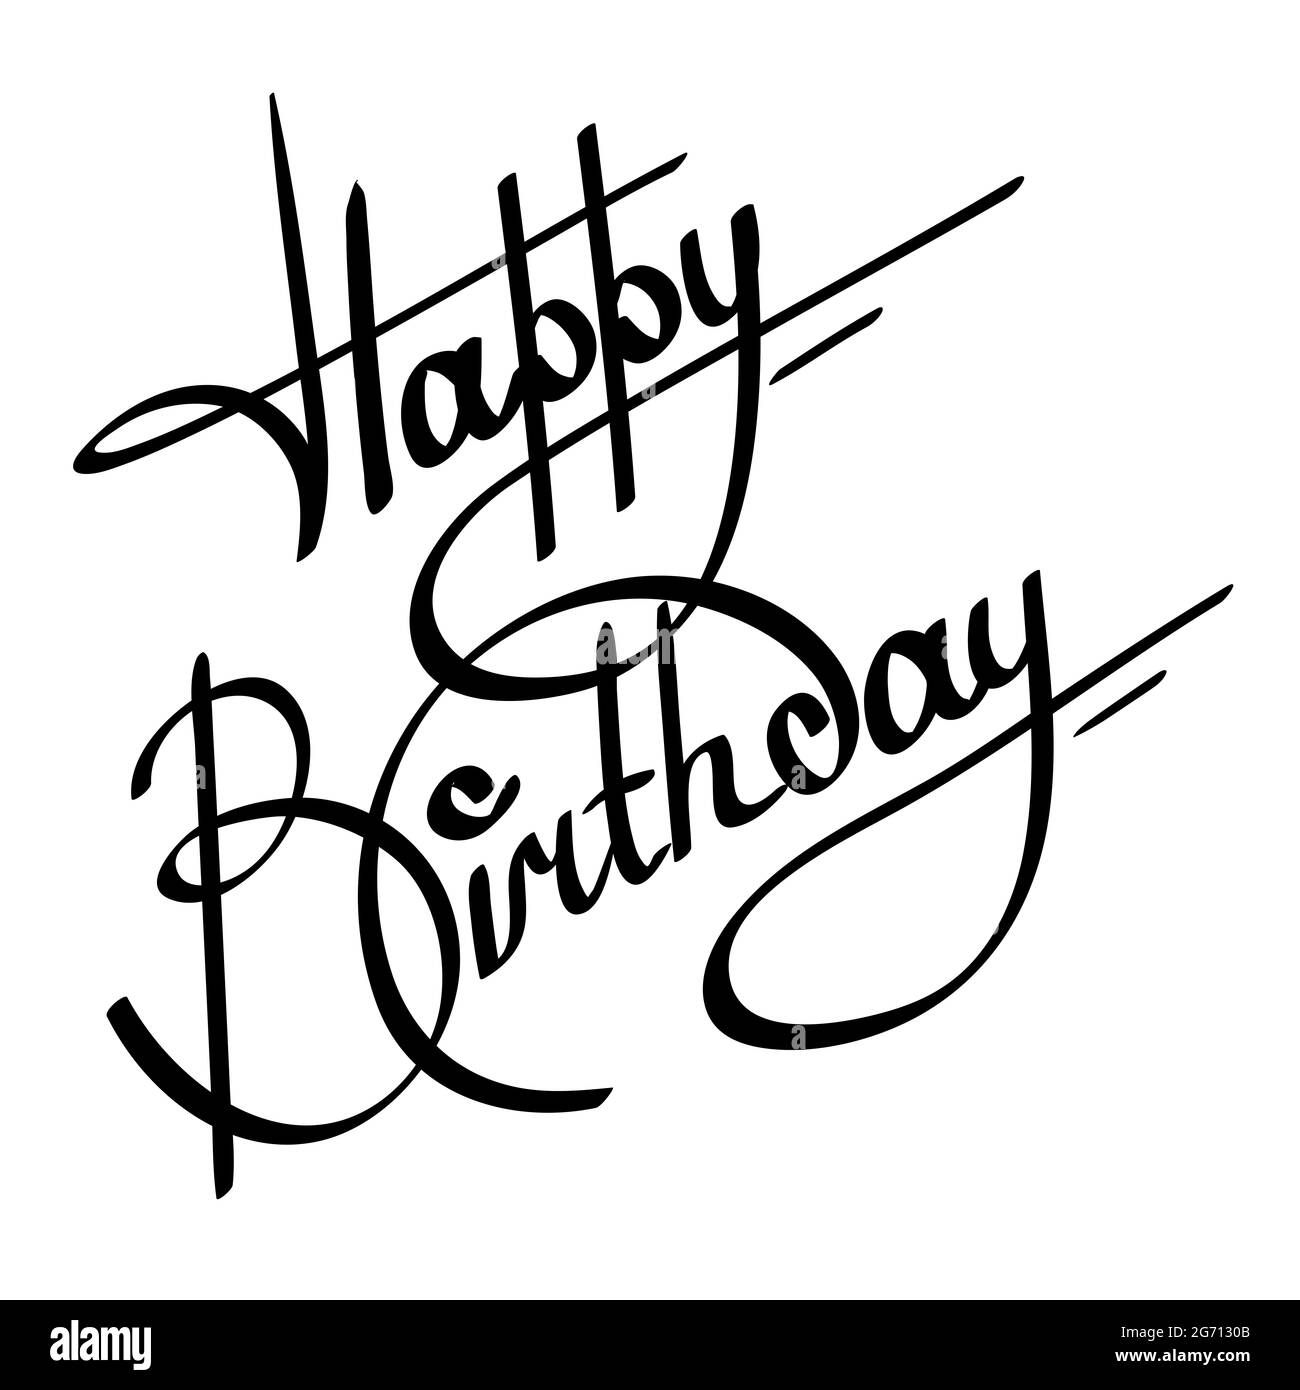 calligraphy happy birthday ornate lettering on white background Stock Photo